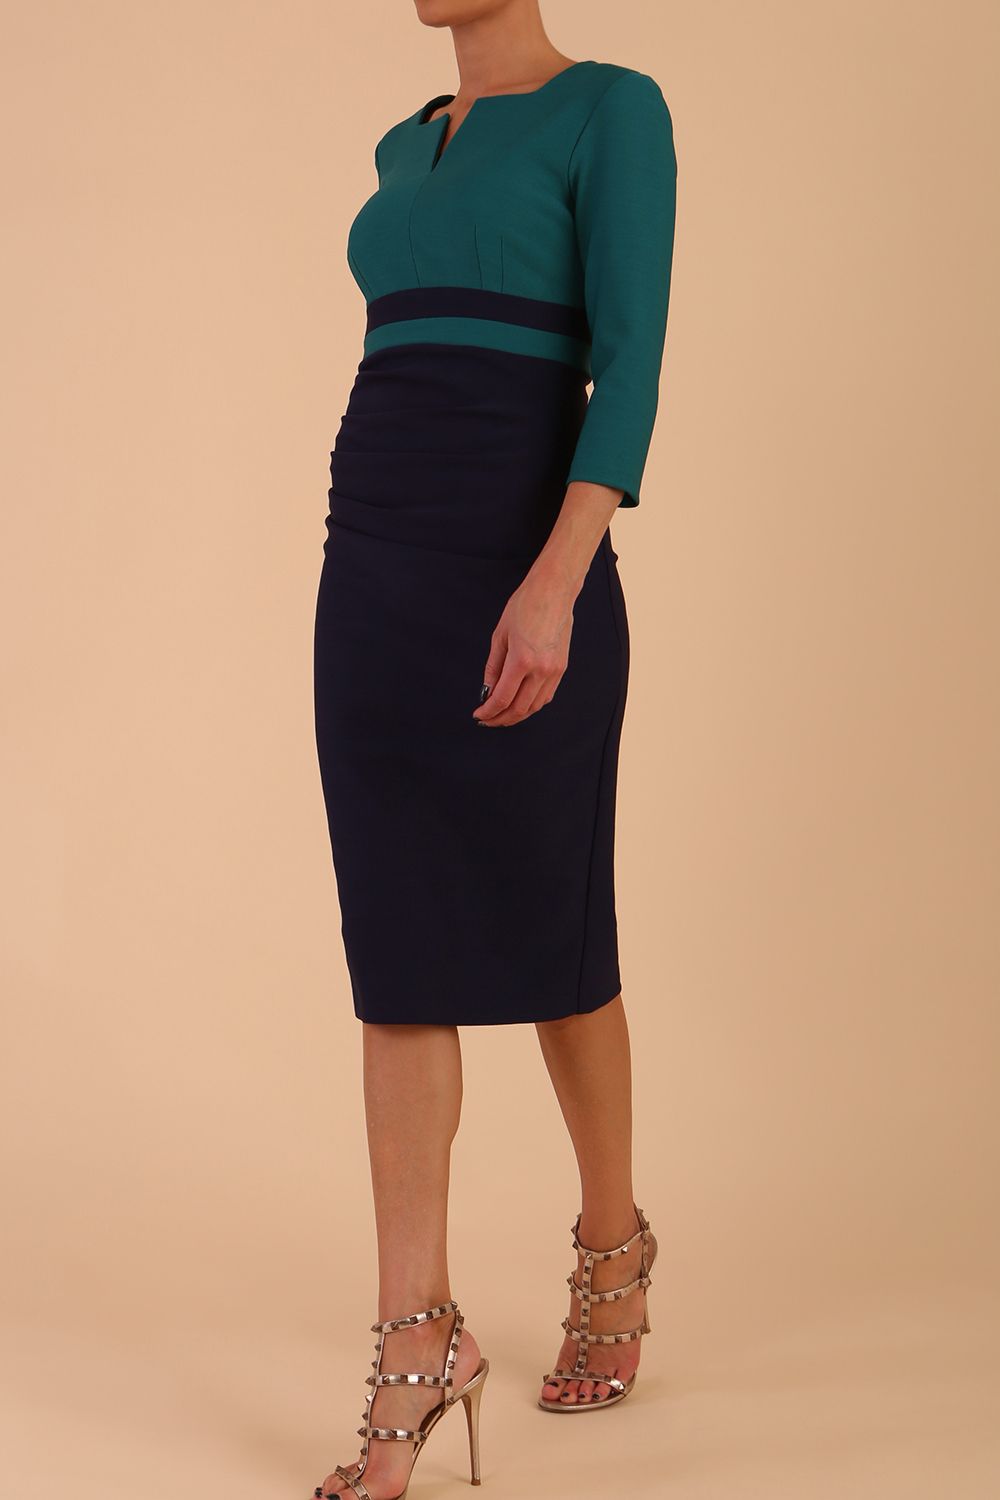 A model is wearing a three quarter sleeve colour block pencil dress by Diva Catwalk in navy and pacific green colour